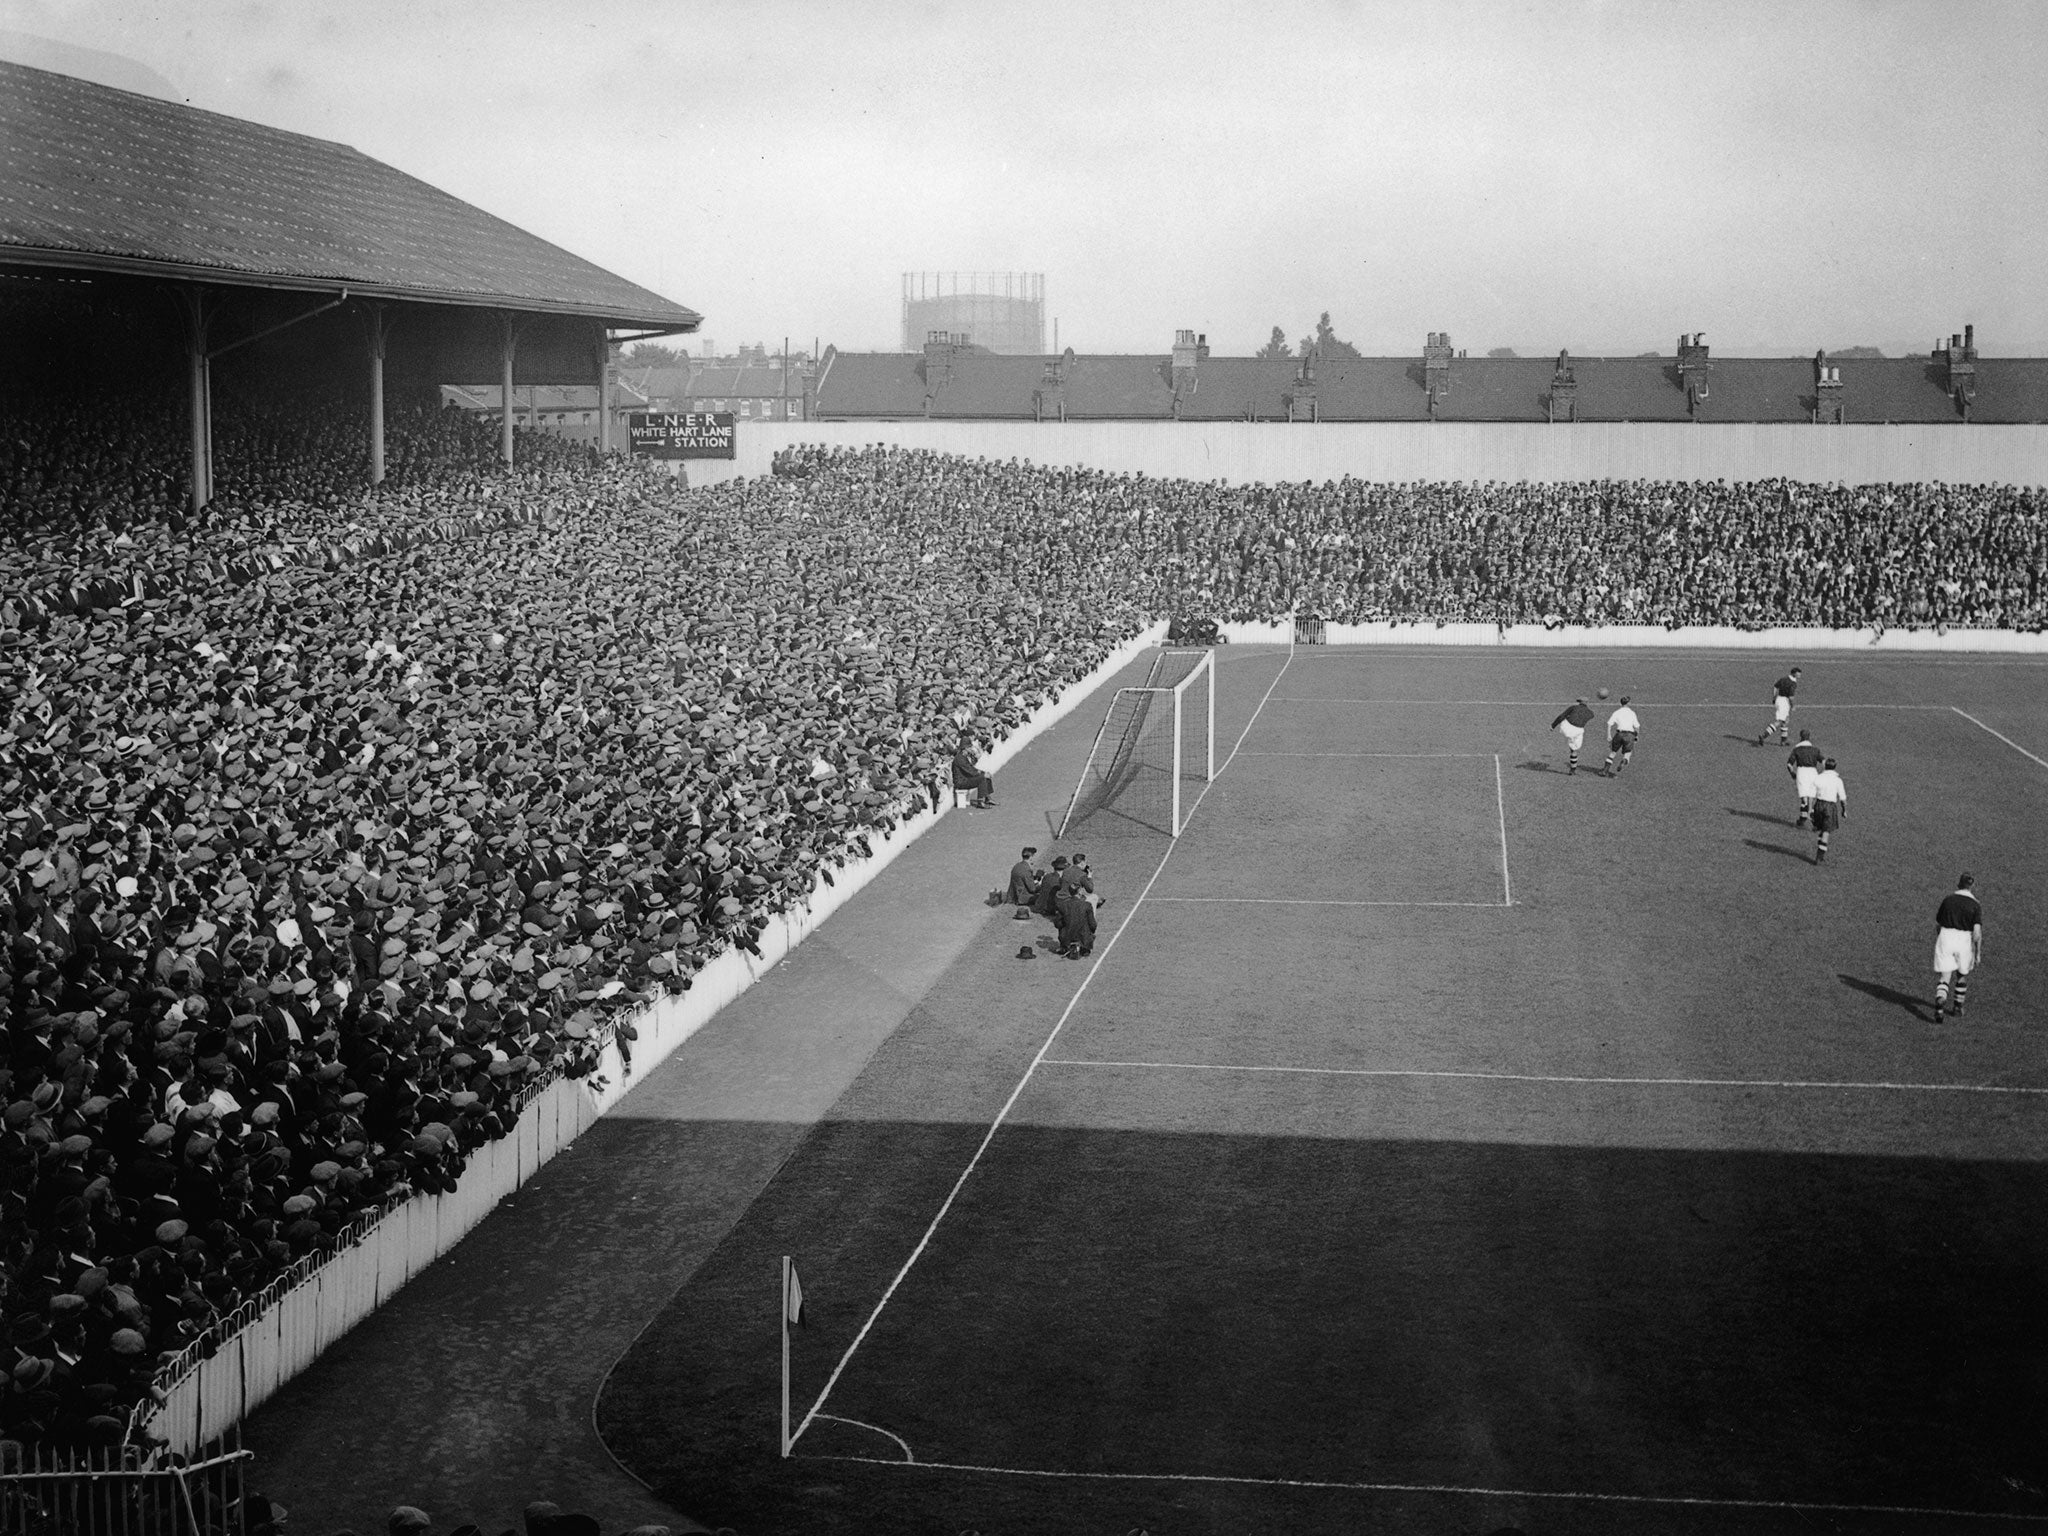 Crowds at White Hart Lane, London, watching the home side,Tottenham Hotspur, play Charlton Athletic, 27th August 1932. Spurs won the match 4-1.